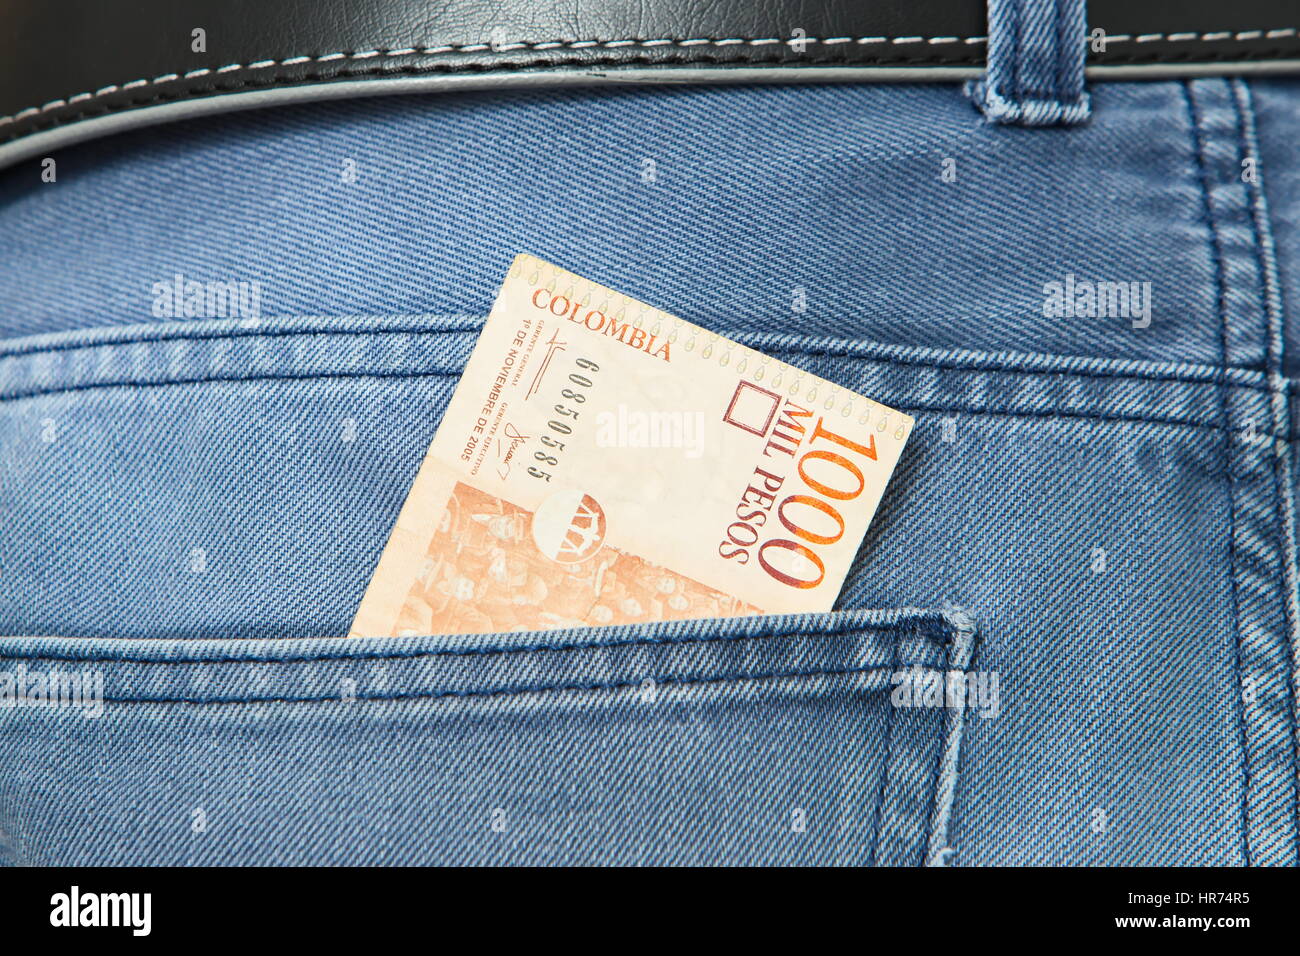 Colombian Pesos in jeans pocket Stock Photo